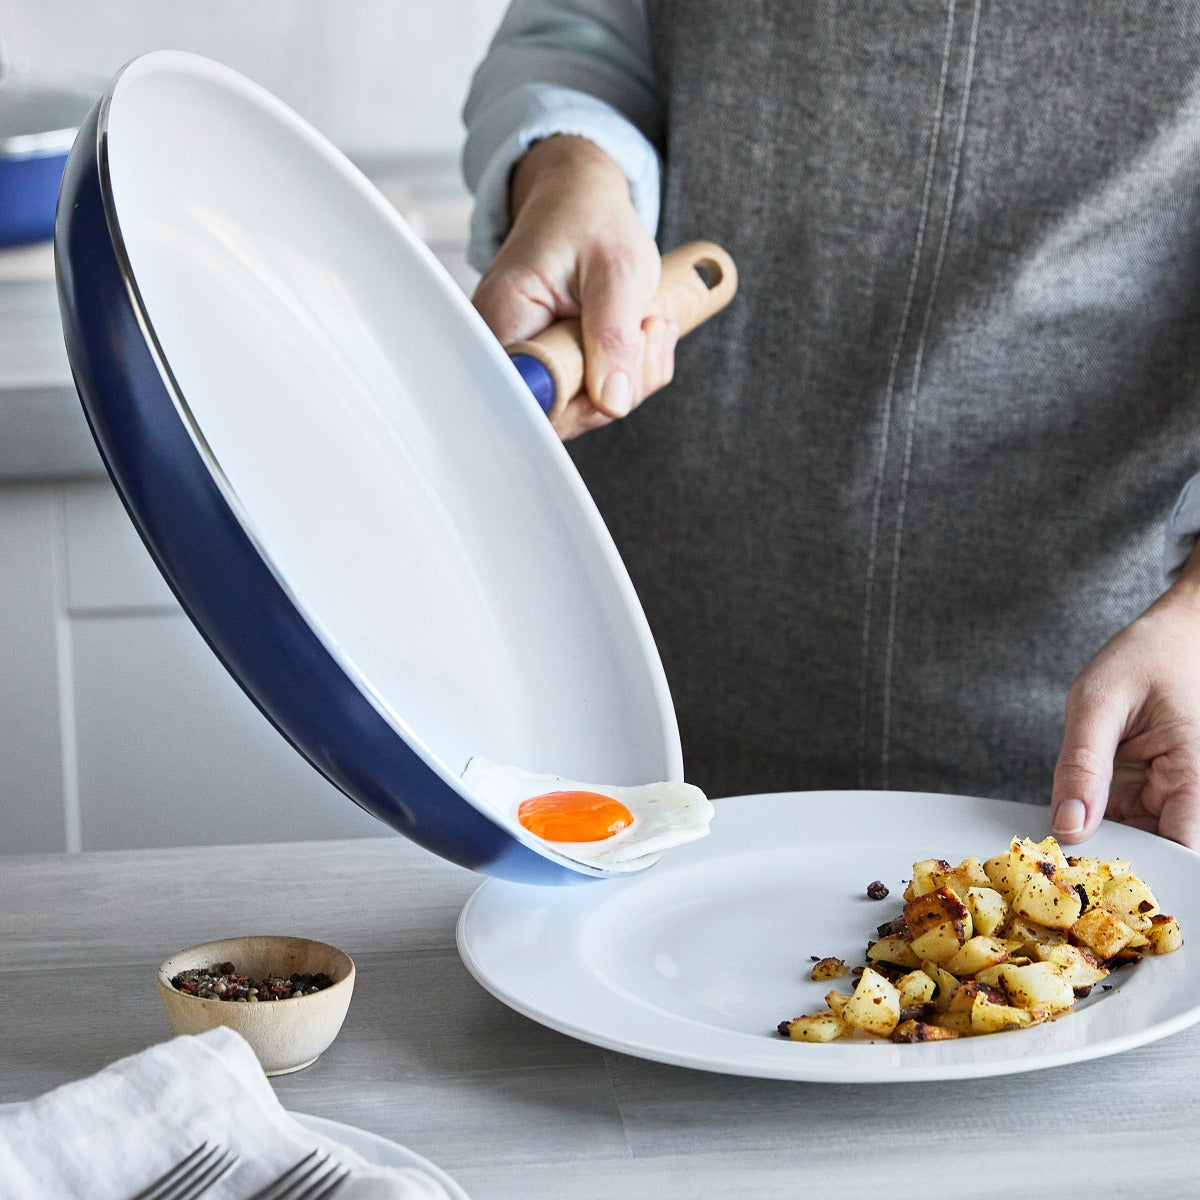 Enamelware Slate Gray Dishes, Shop Now